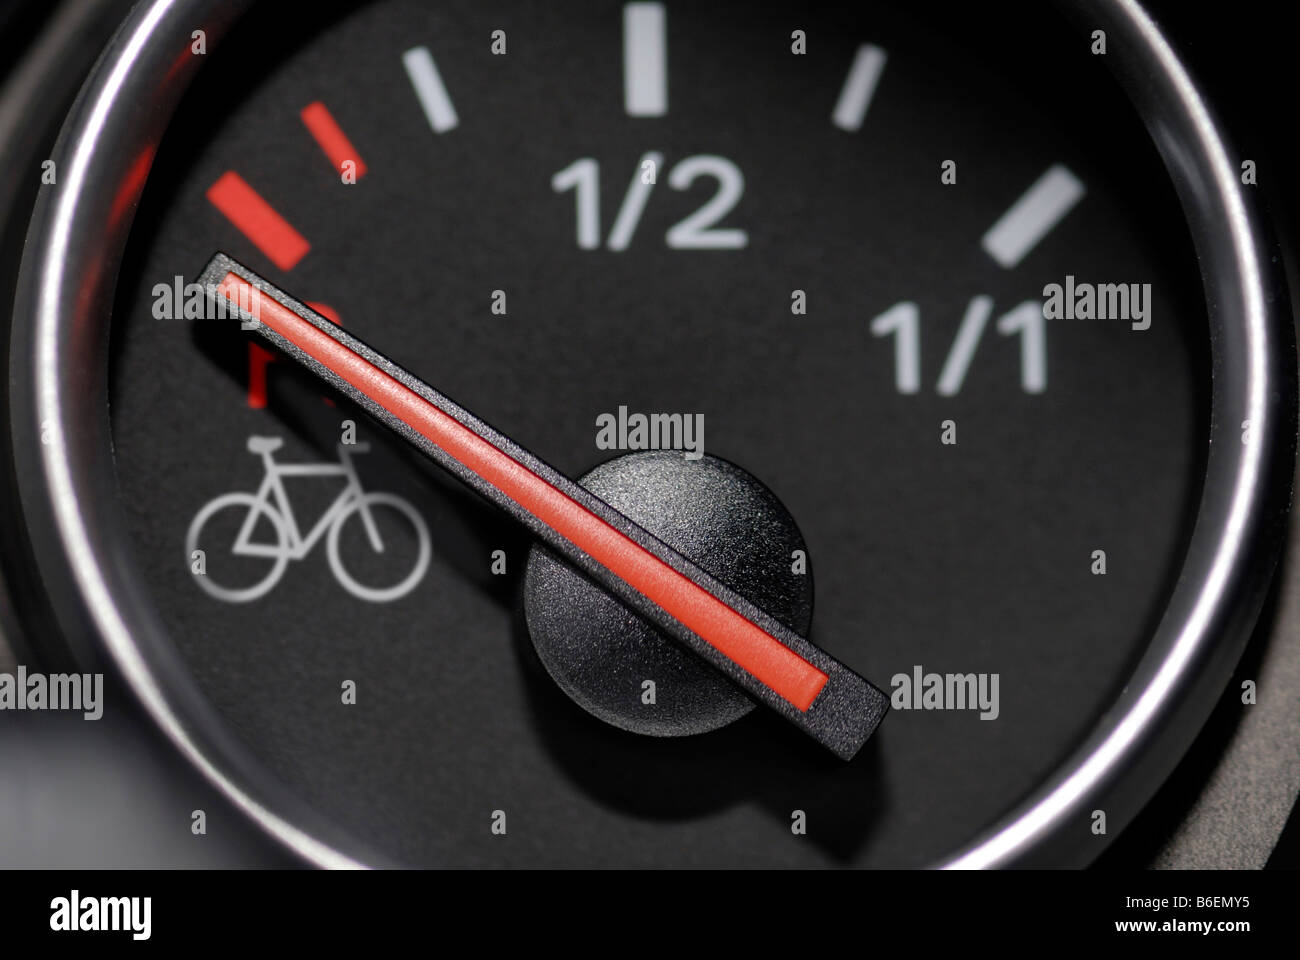 Empty fuel gauge showing the image of a bicycle, symbolic photo for high petrol prices Stock Photo